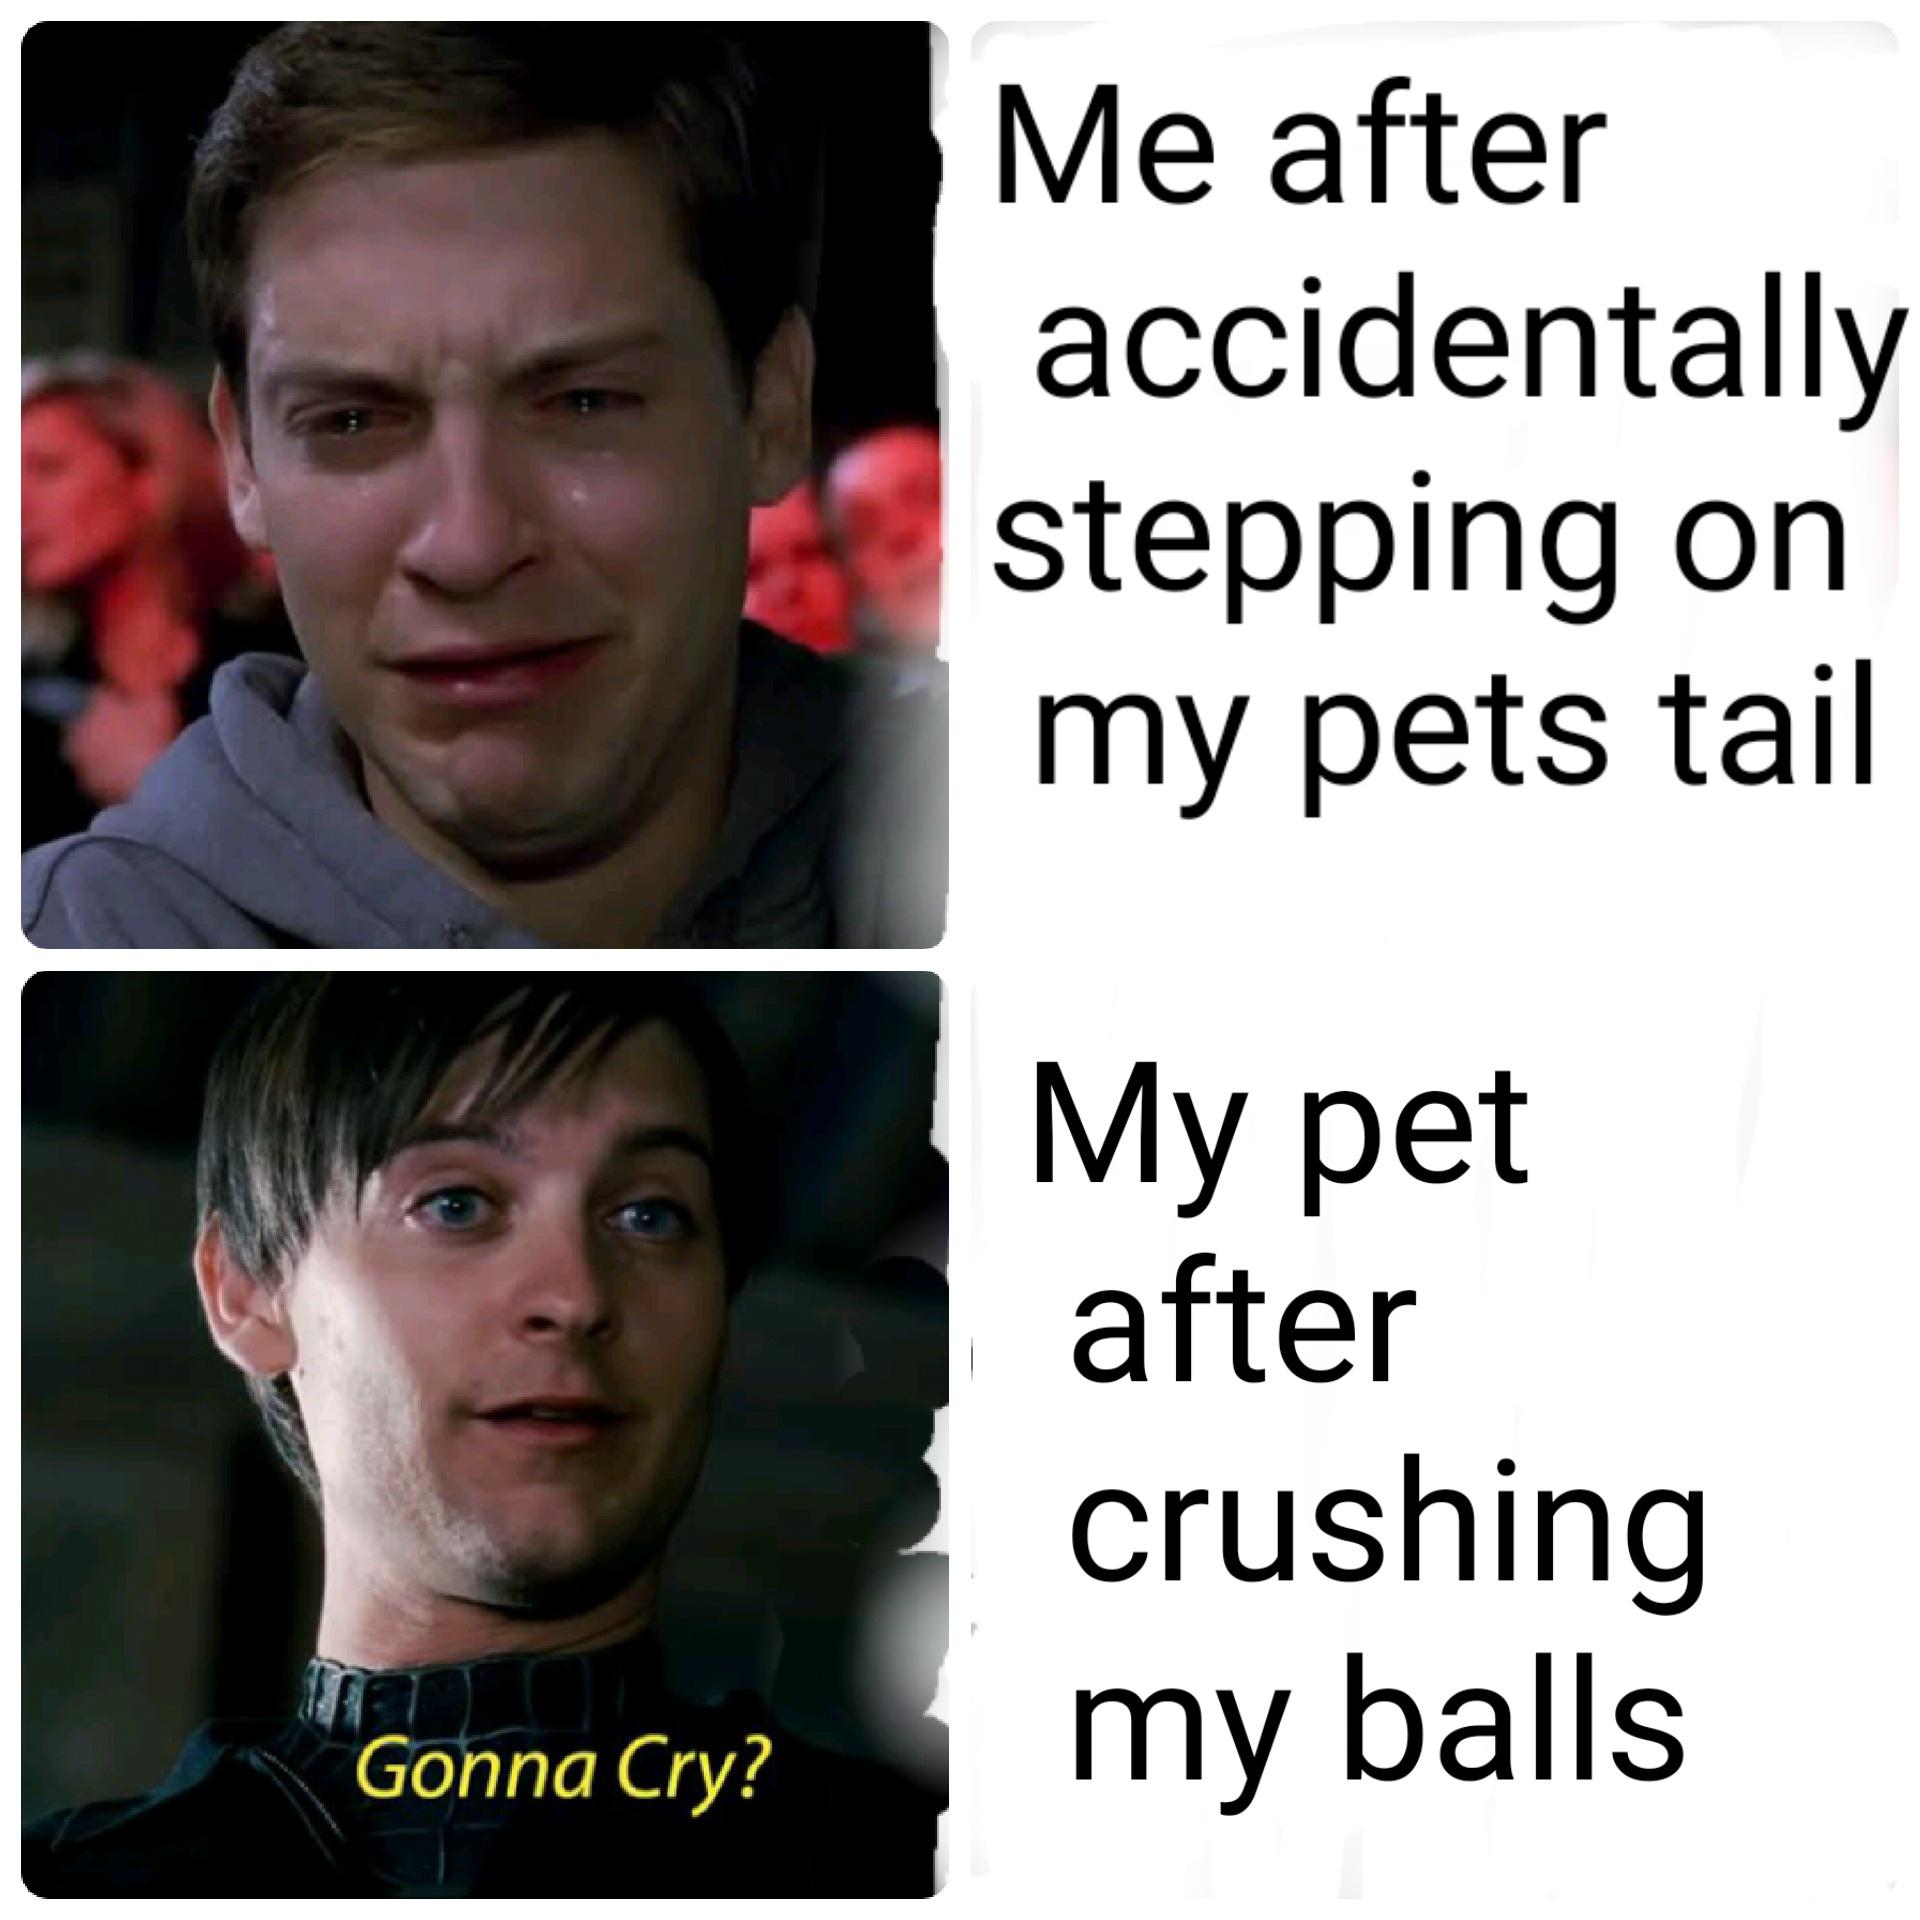 dank memes - funny memes -photo caption - Gonna Cry? Me after accidentally stepping on my pets tail My pet after crushing my balls